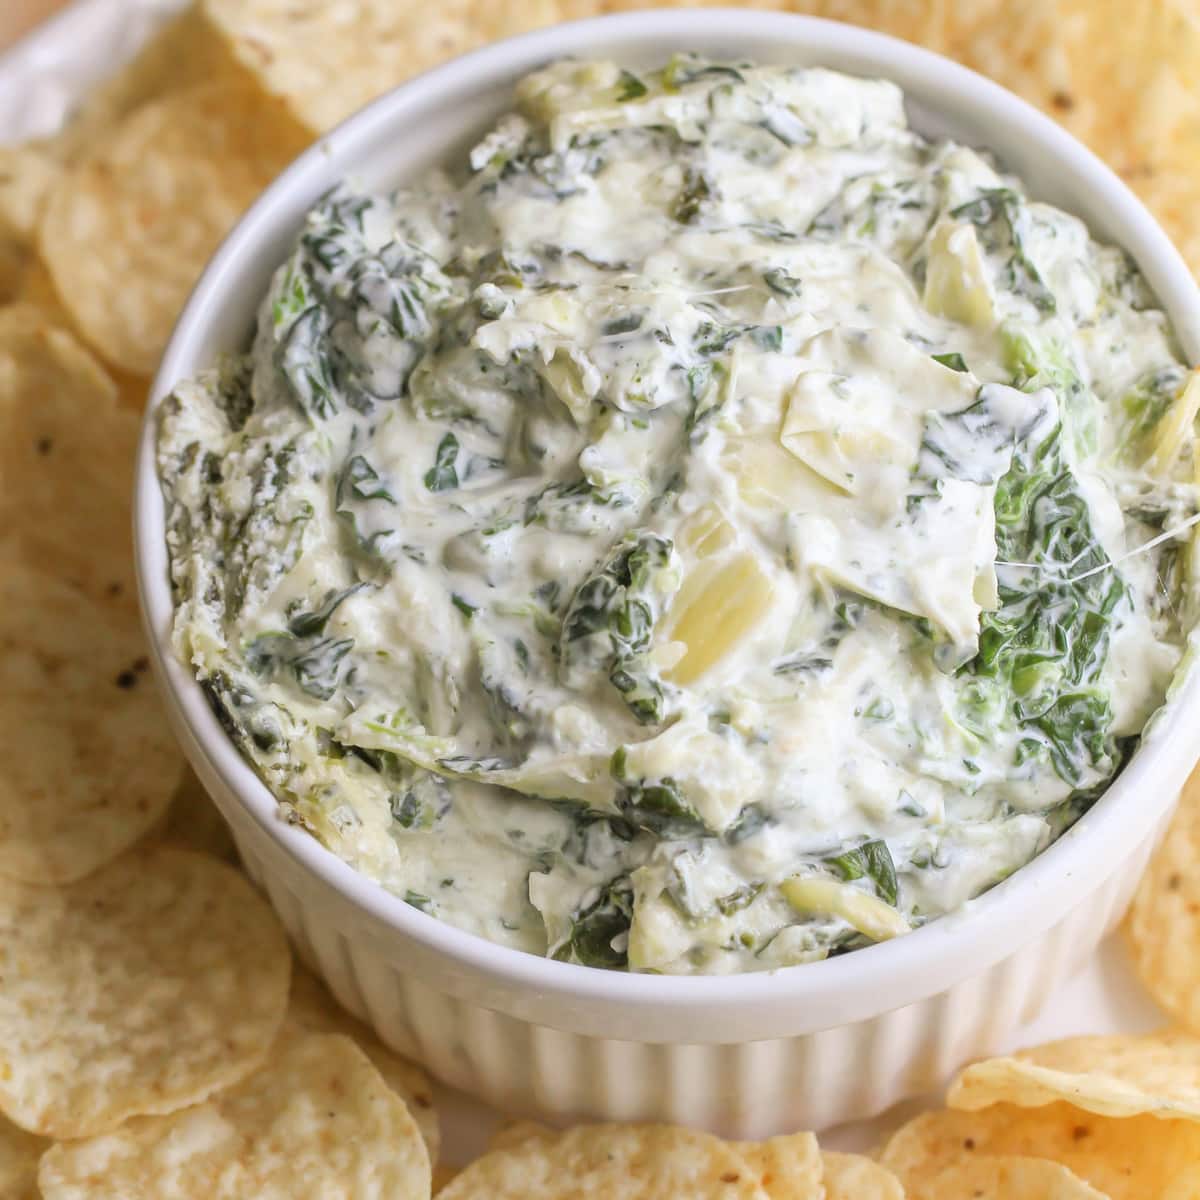 Thanksgiving dinner ideas - spinach artichoke dip served with tortilla chips.